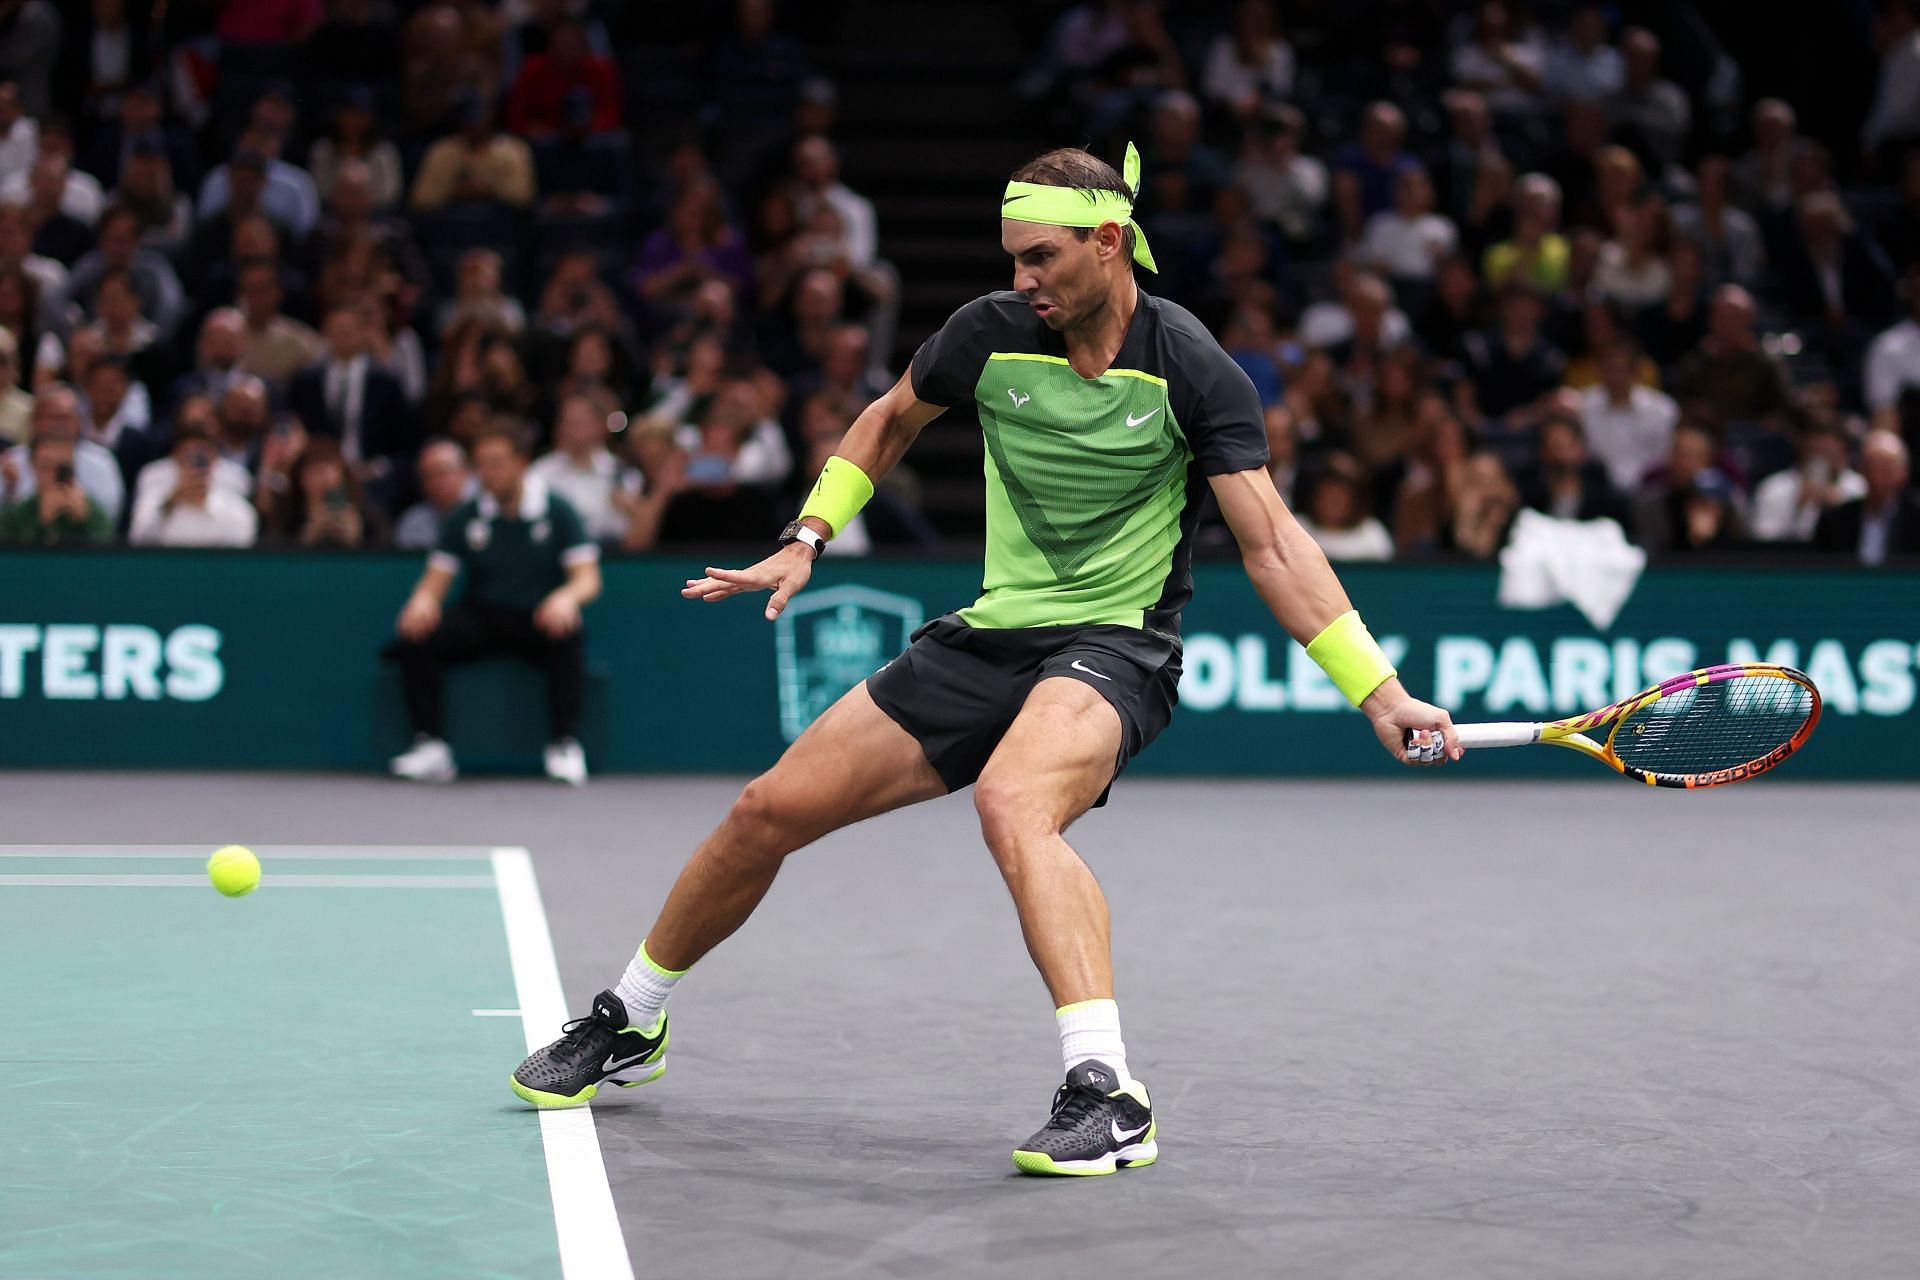 Watch Rafael Nadal hits a picture-perfect half-volley against Felix Auger-Aliassime at ATP Finals